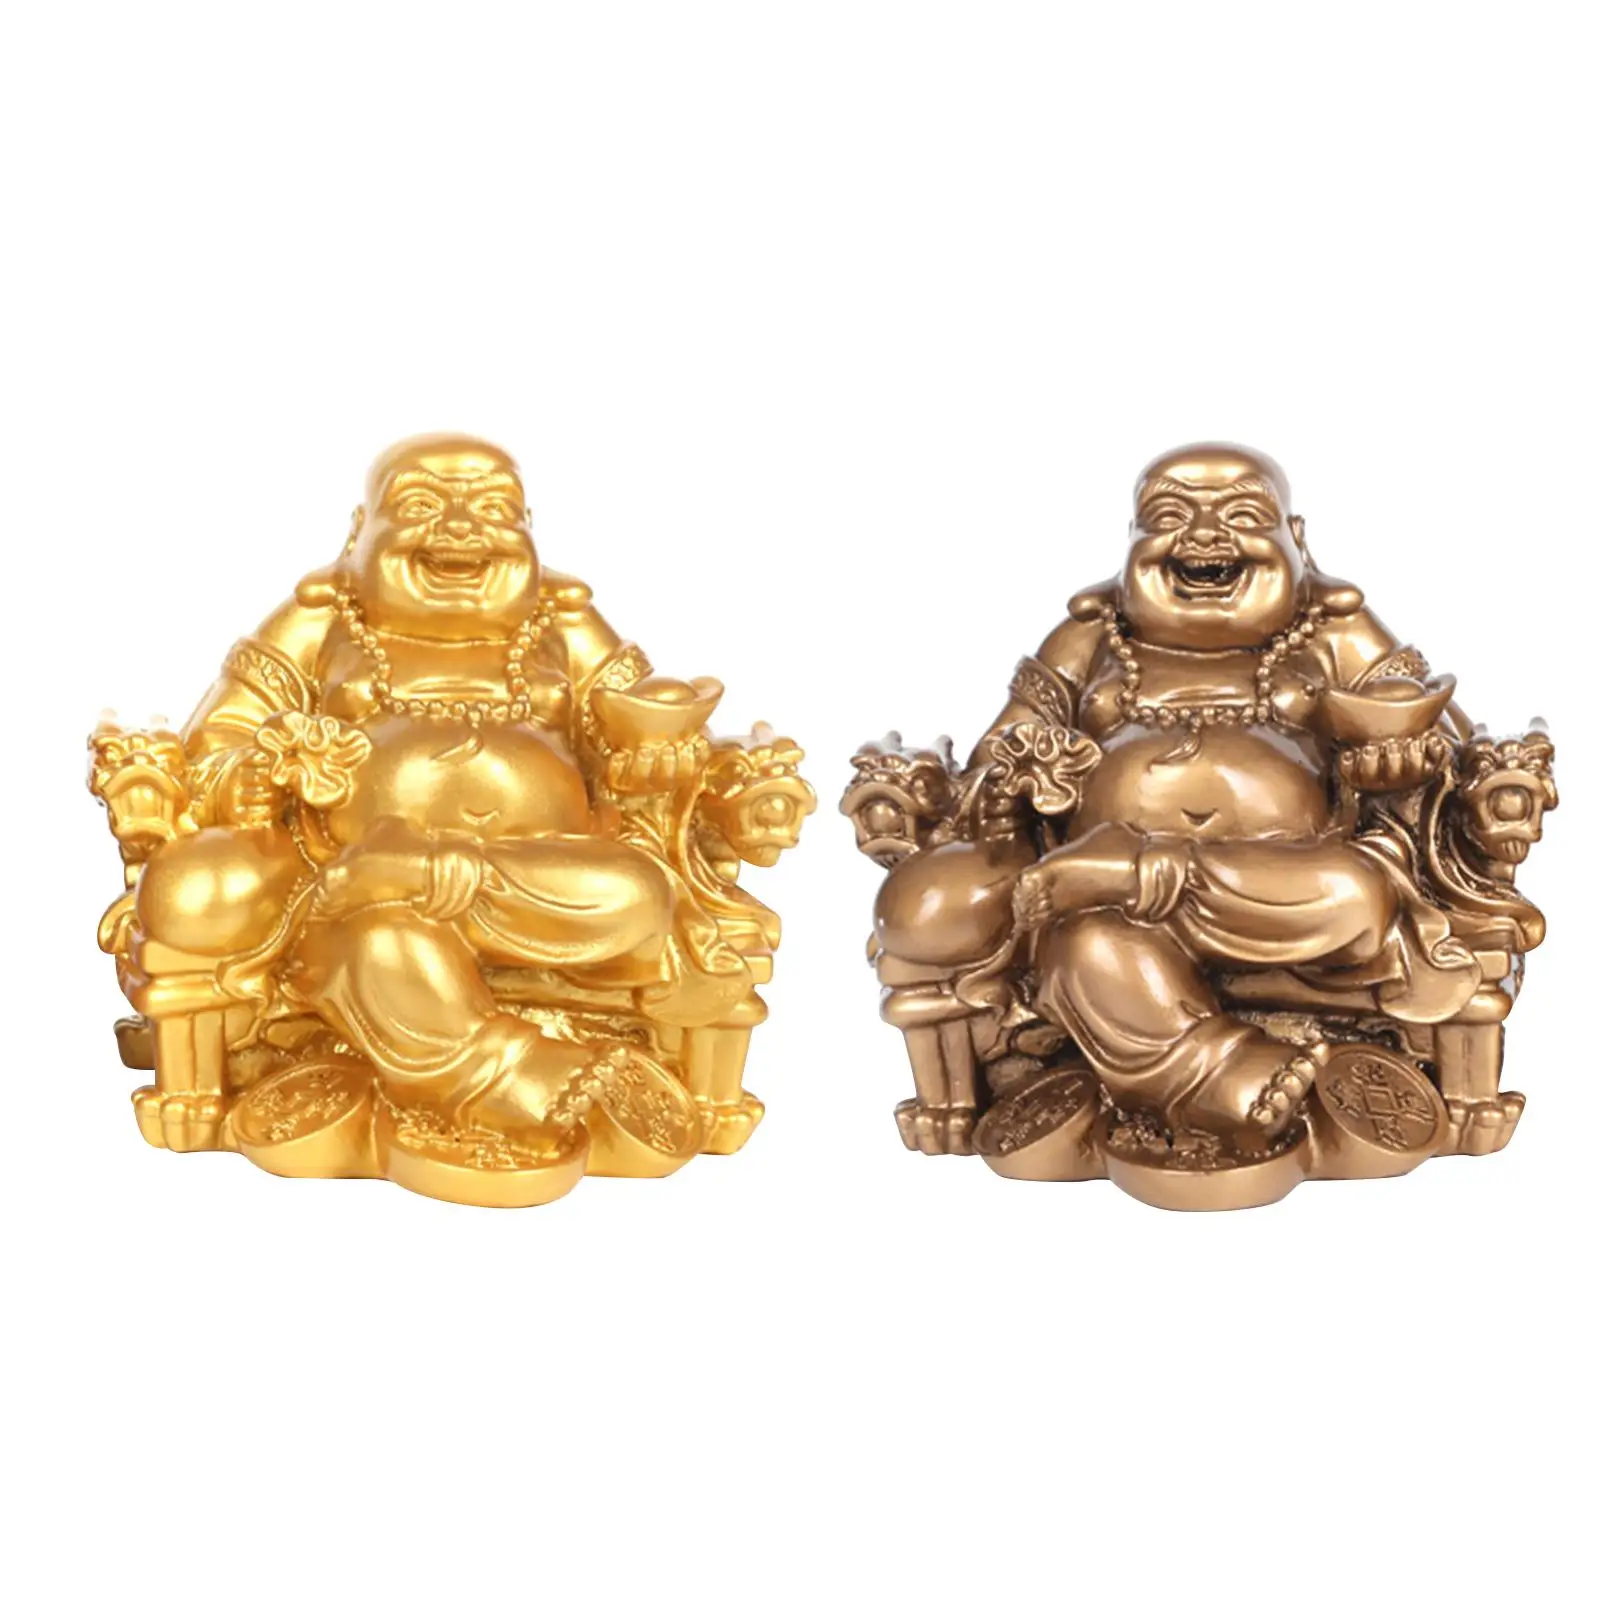 Resin Buddha Statues Sculpture Figurine Fengshui Good Luck for Shelf Tea Room Collectible Decoration Ornament